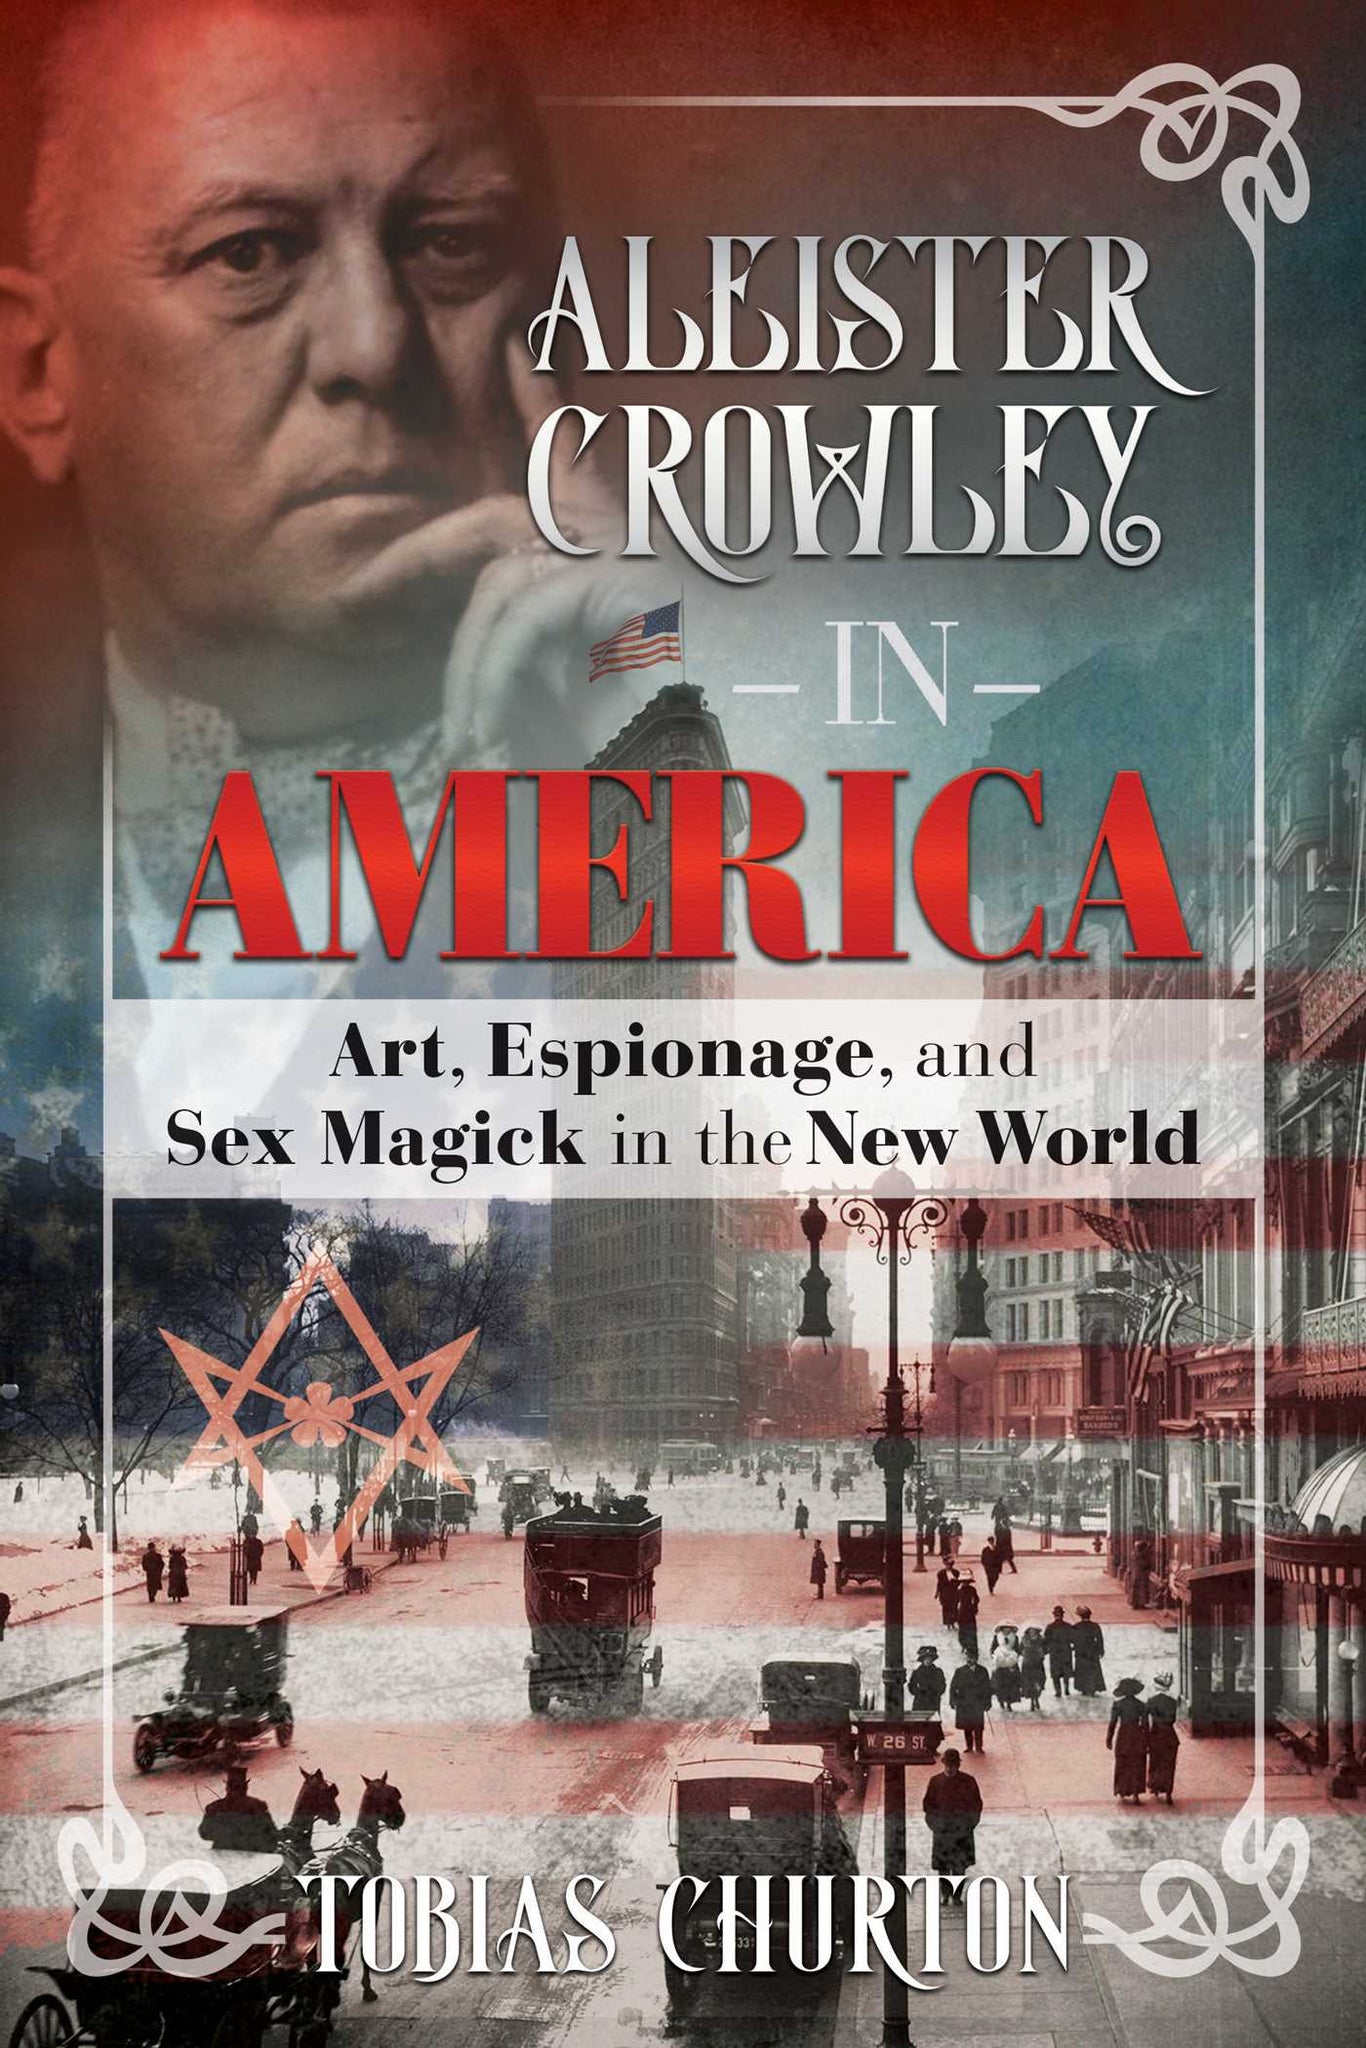 Aleister Crowley in America : Art, Espionage, and Sex Magick in the New World